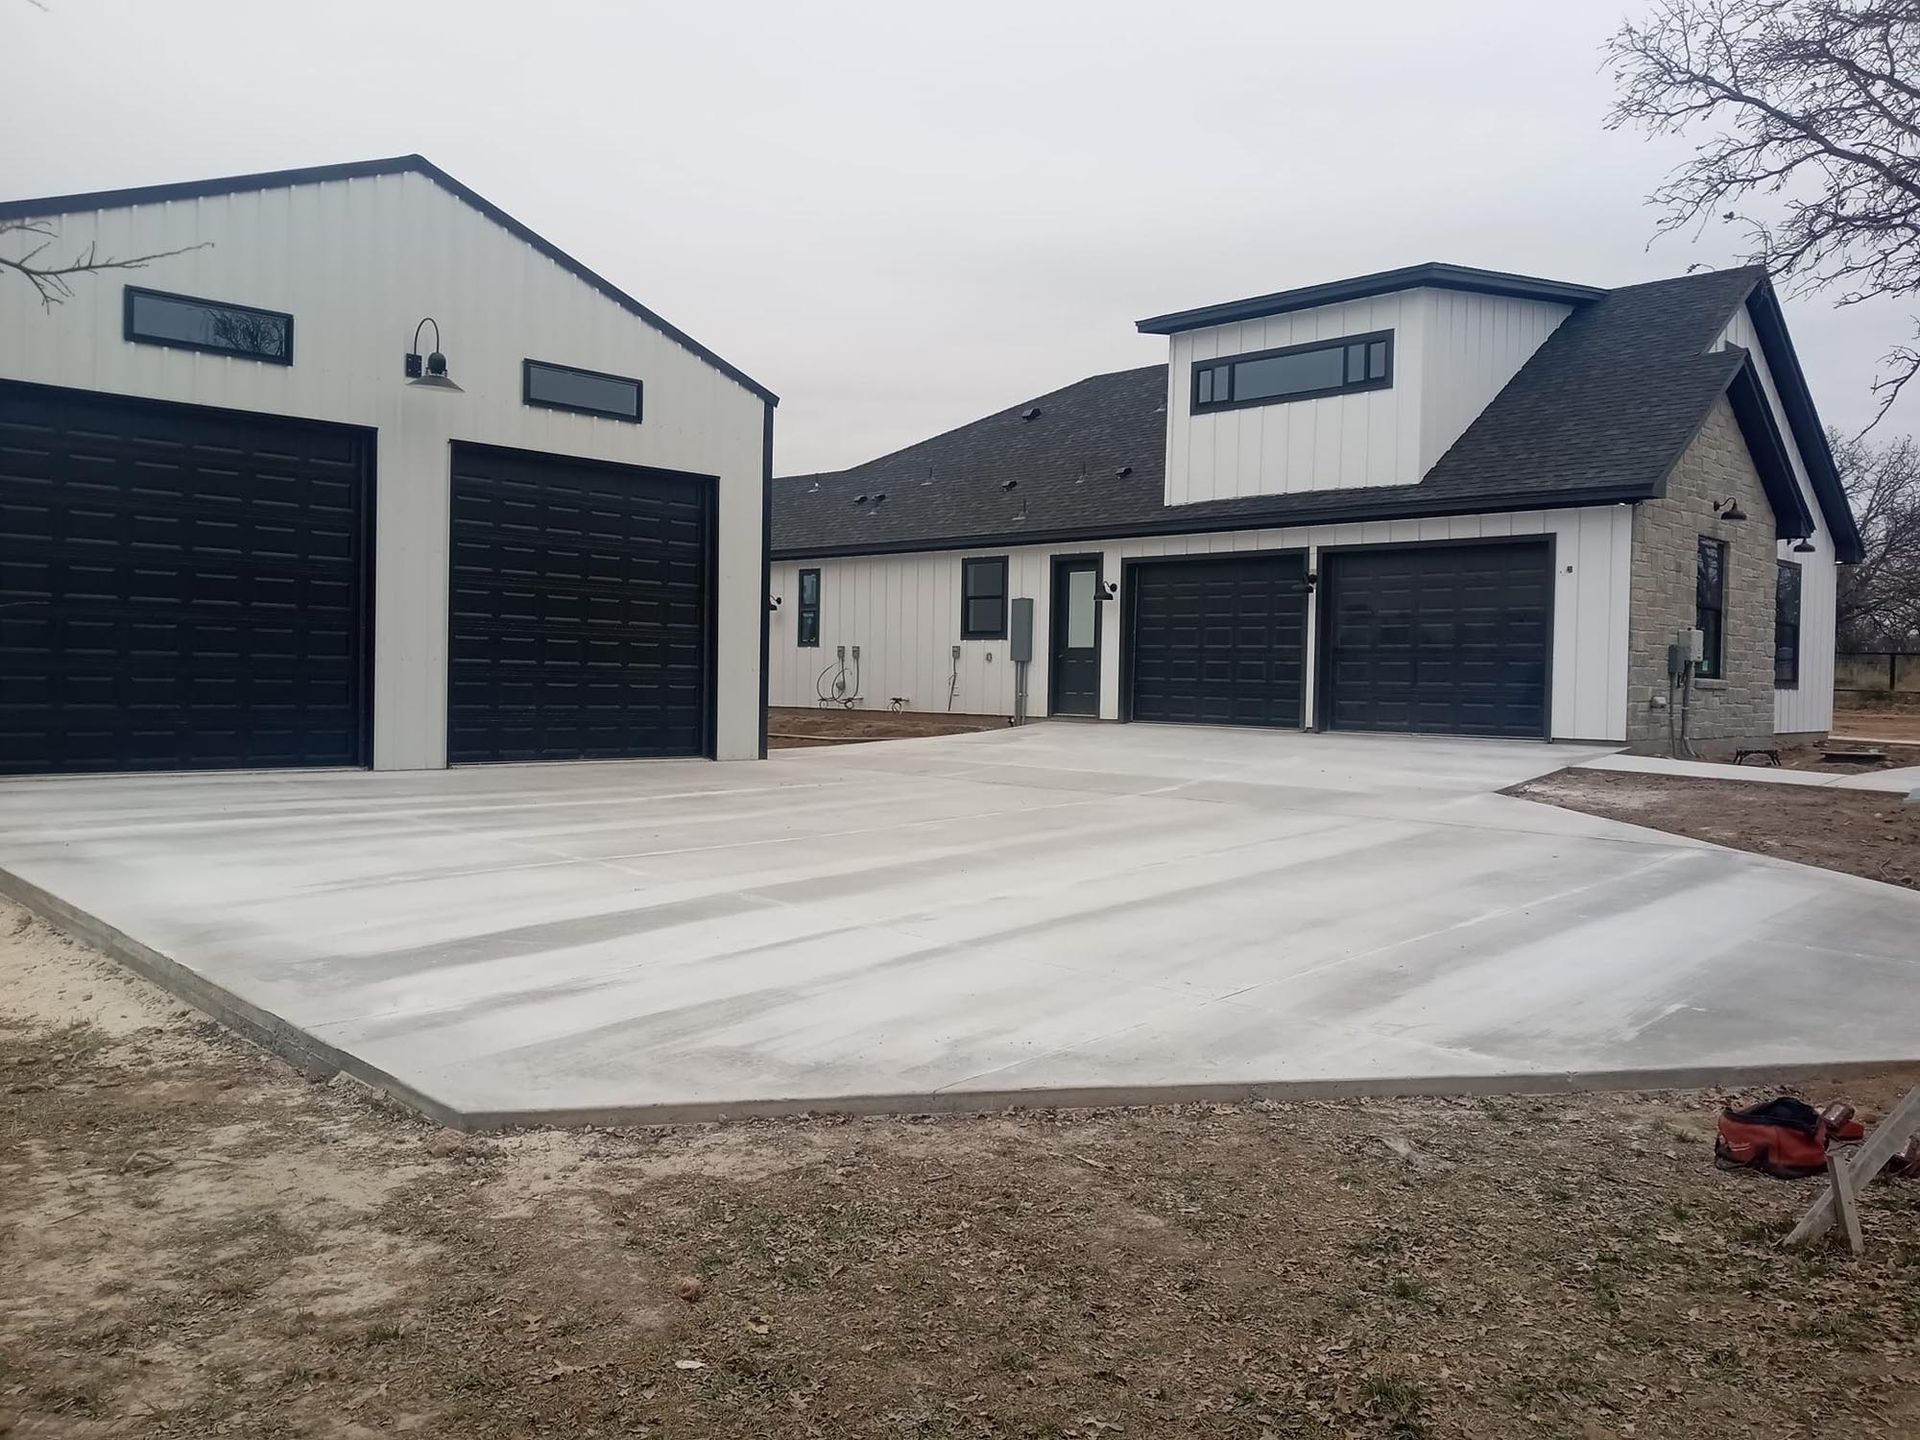 Newly installed concrete driveway